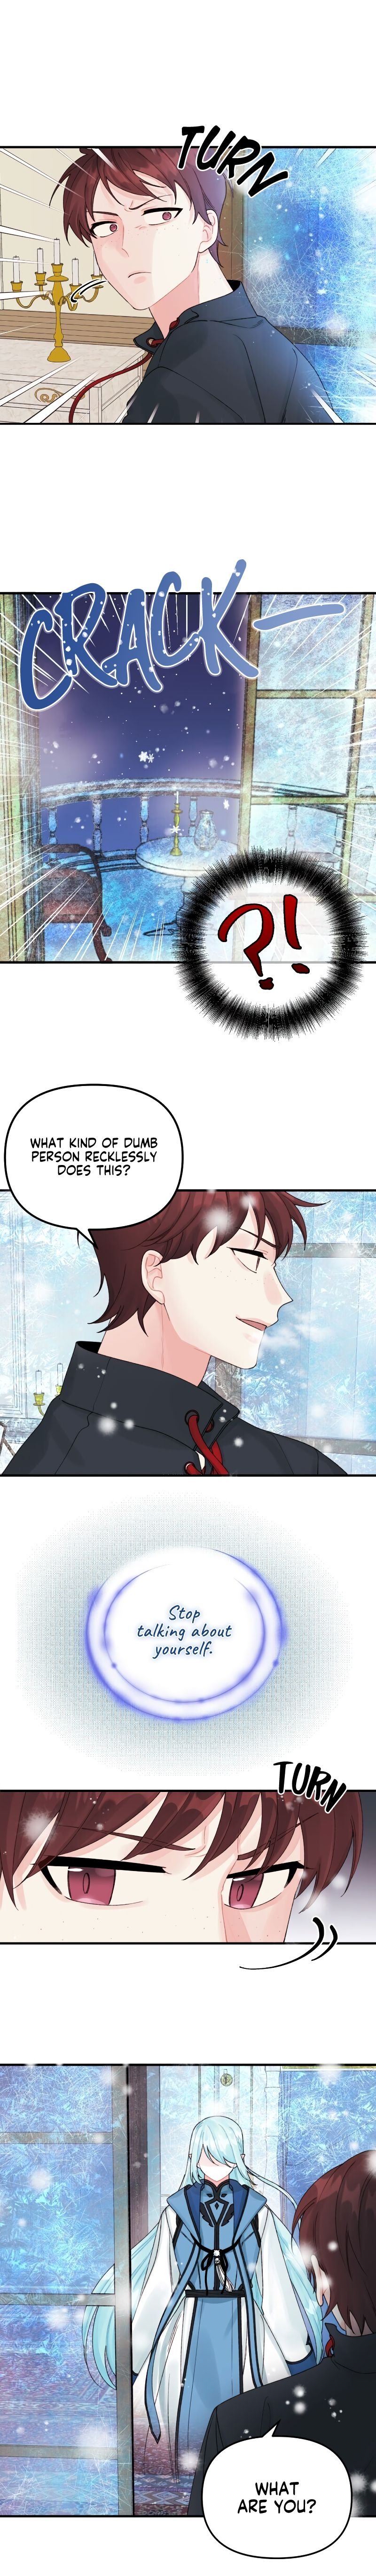 the-princess-in-the-dumpster-chap-36-2